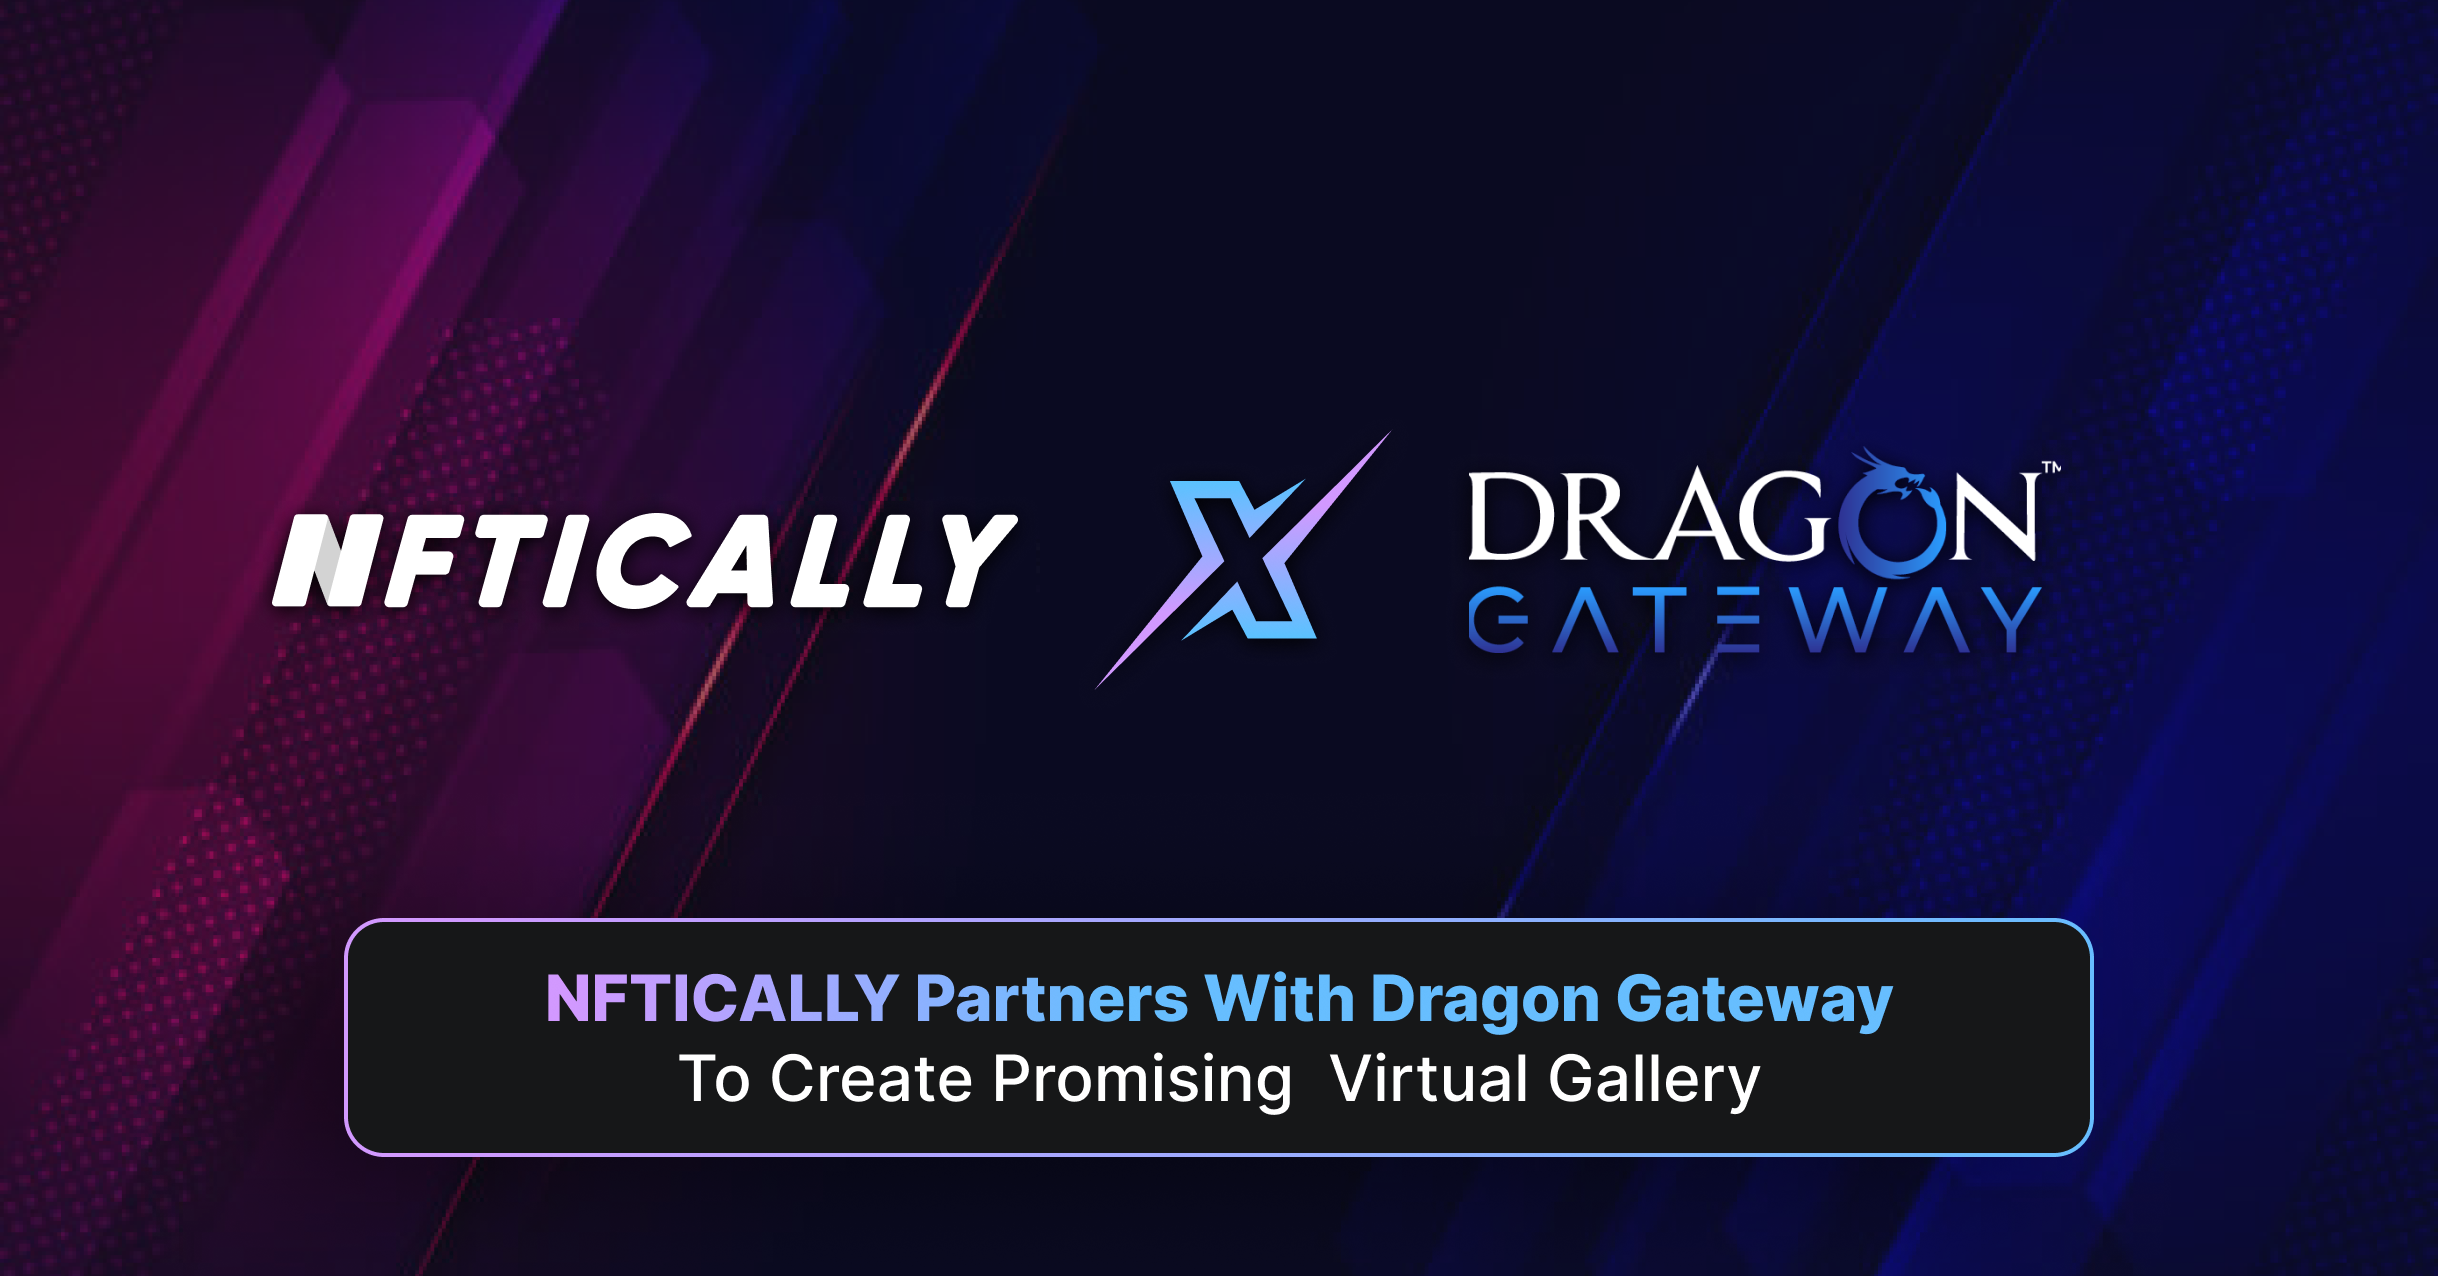 <strong>NFTICALLY Partners with Dragon Gateway to Create Promising Virtual Gallery</strong>